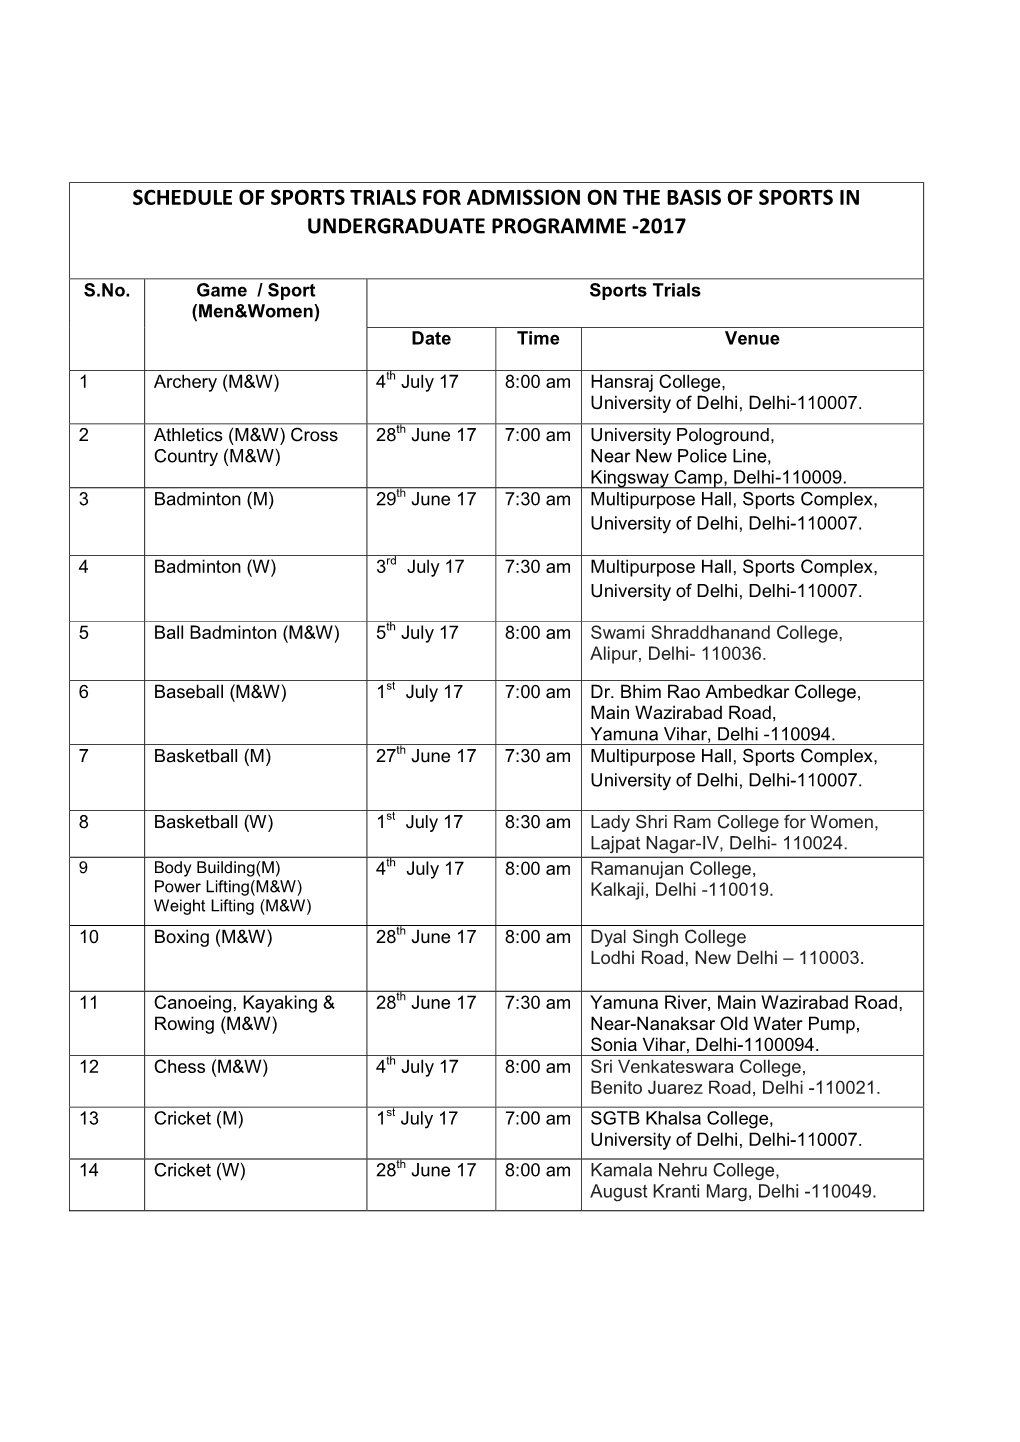 Schedule of Sports Trials for Admission on the Basis of Sports in Undergraduate Programme -2017